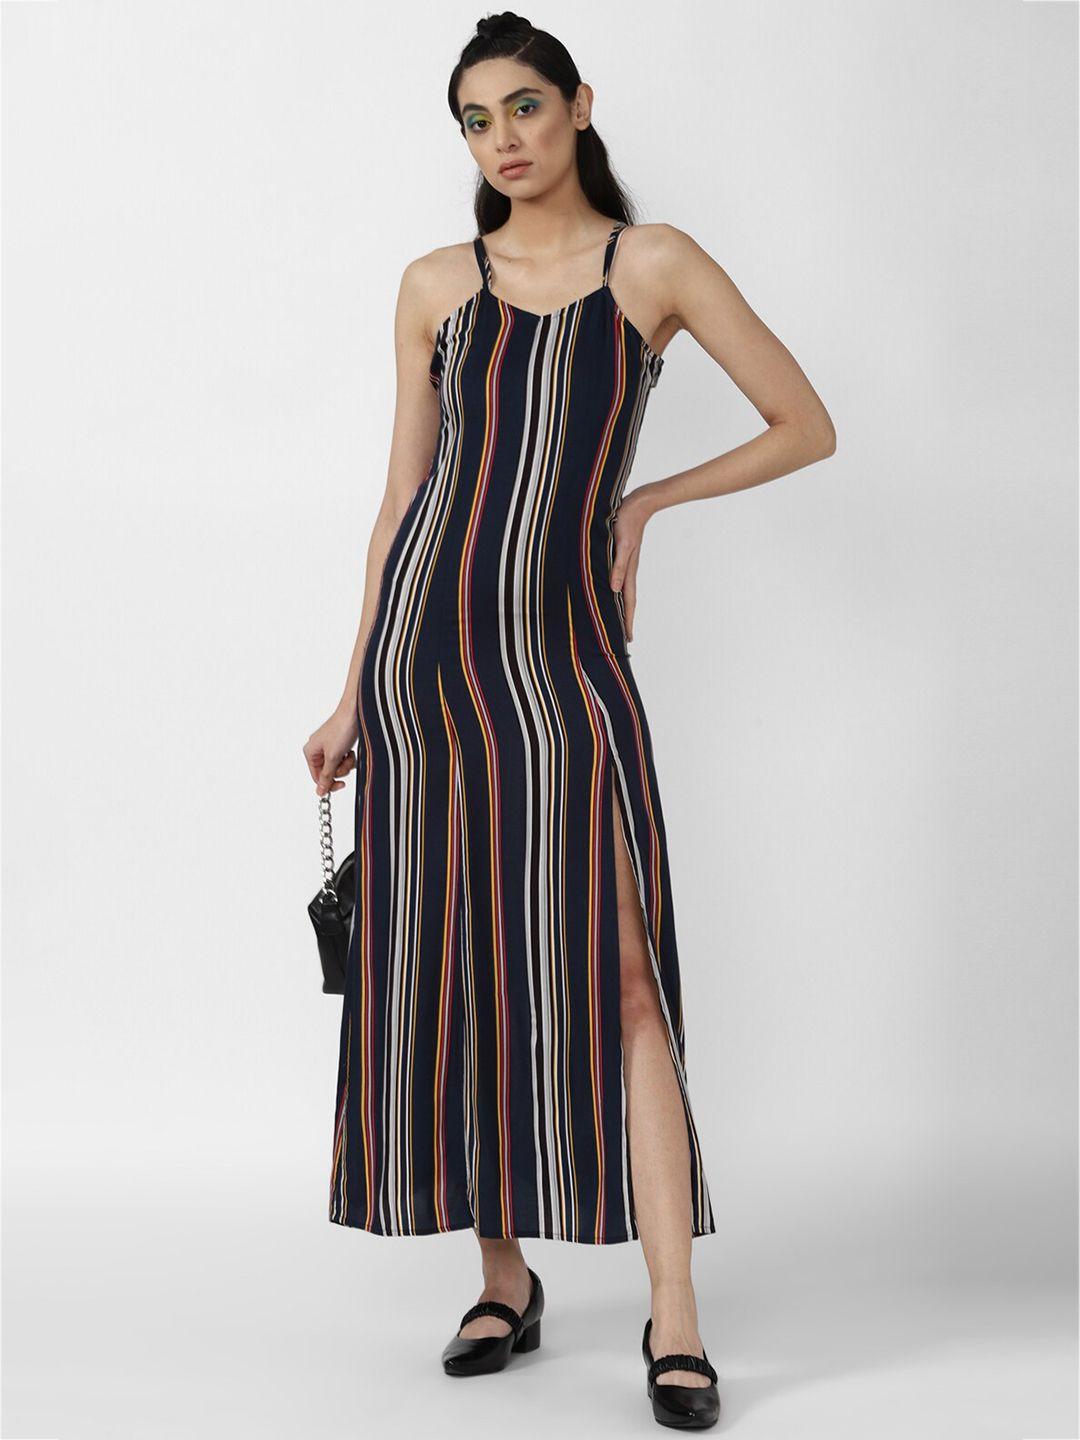 FOREVER 21 Black Striped Maxi Dress with Front Slit